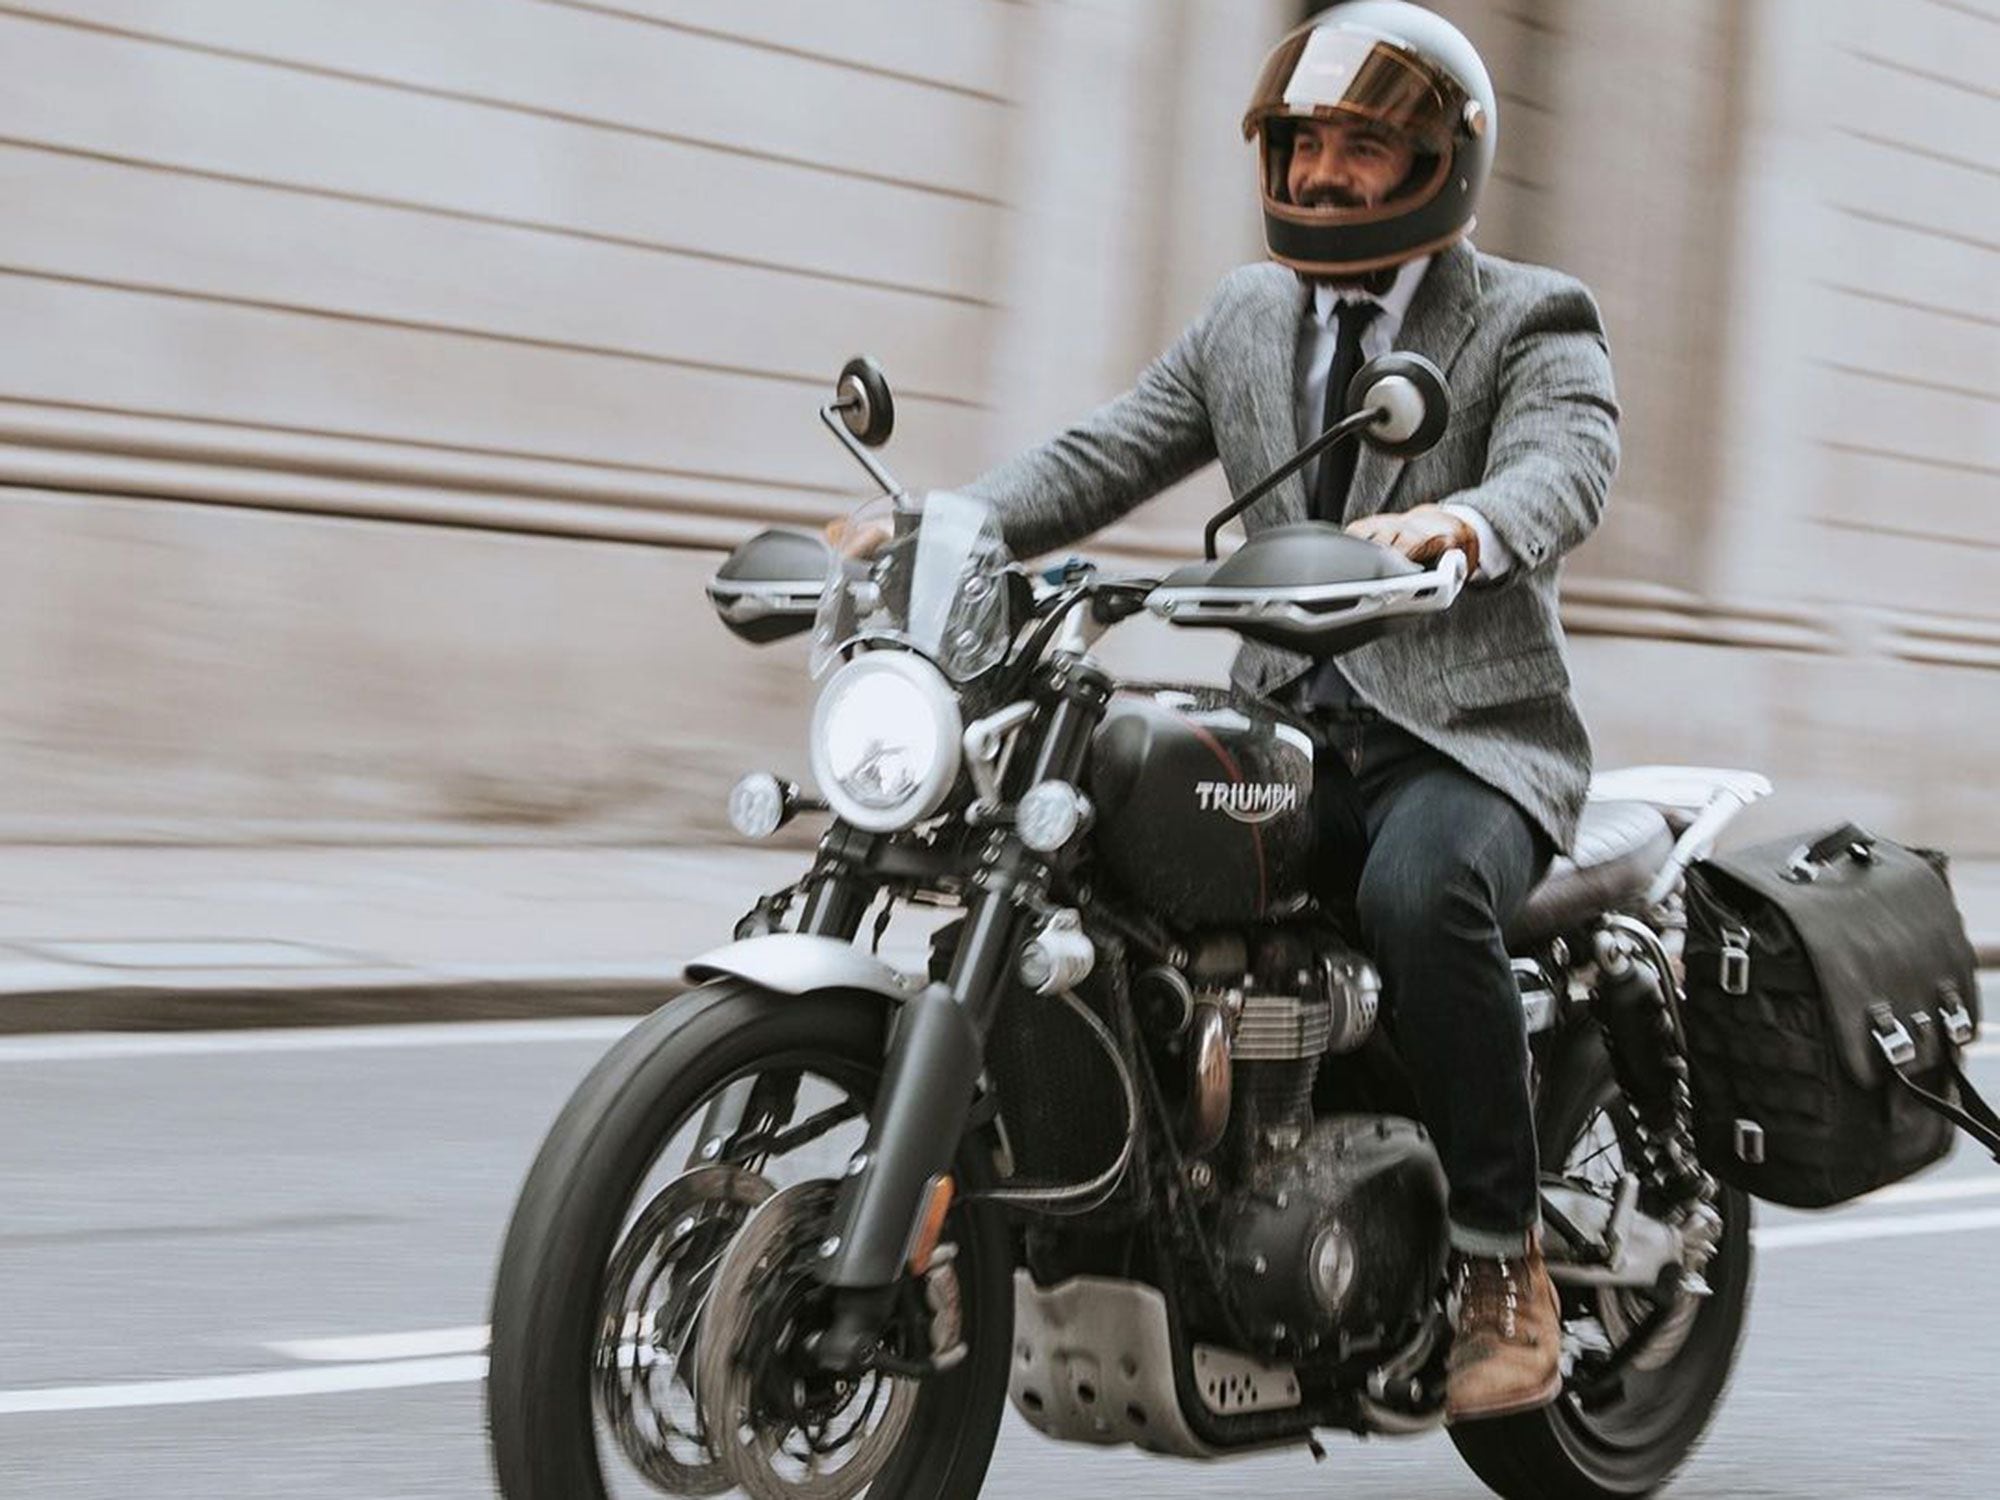 For 10 years, the DGR has been encouraging you to dress funny and ride classic bikes in the name of men’s health awareness.